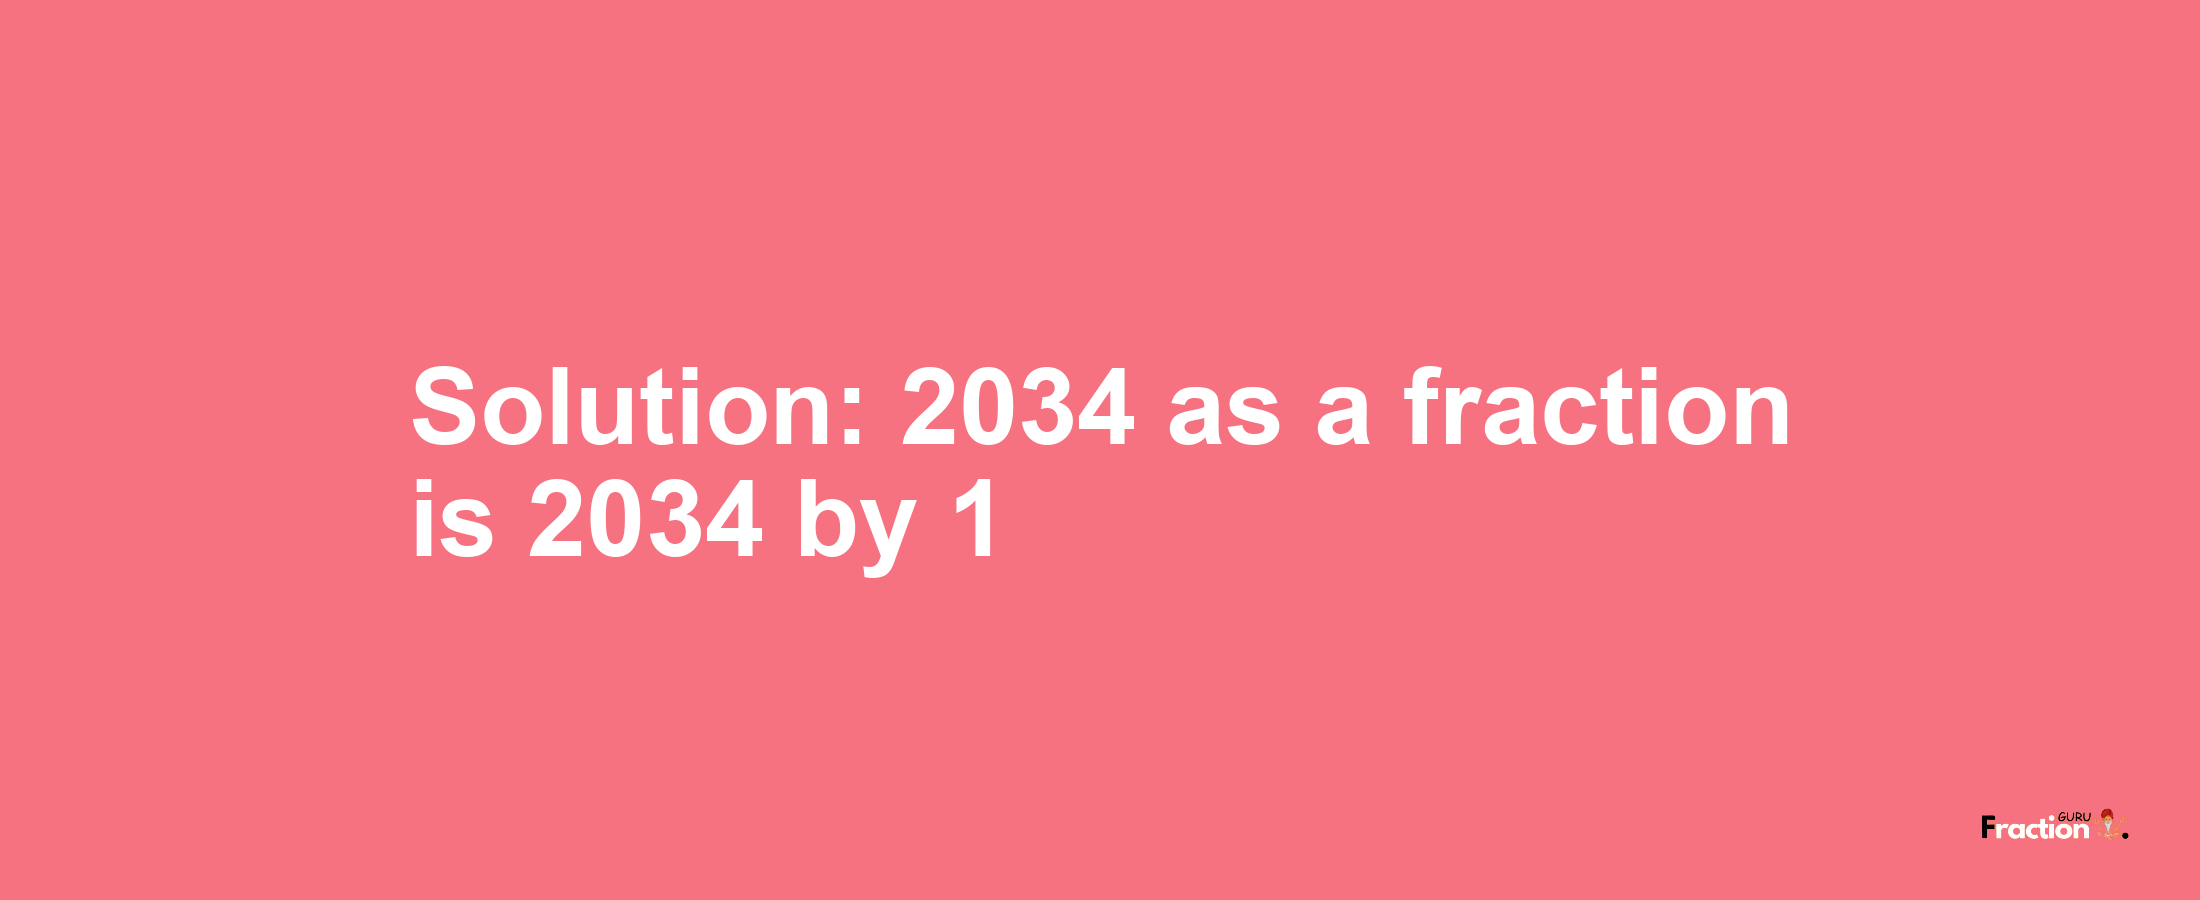 Solution:2034 as a fraction is 2034/1